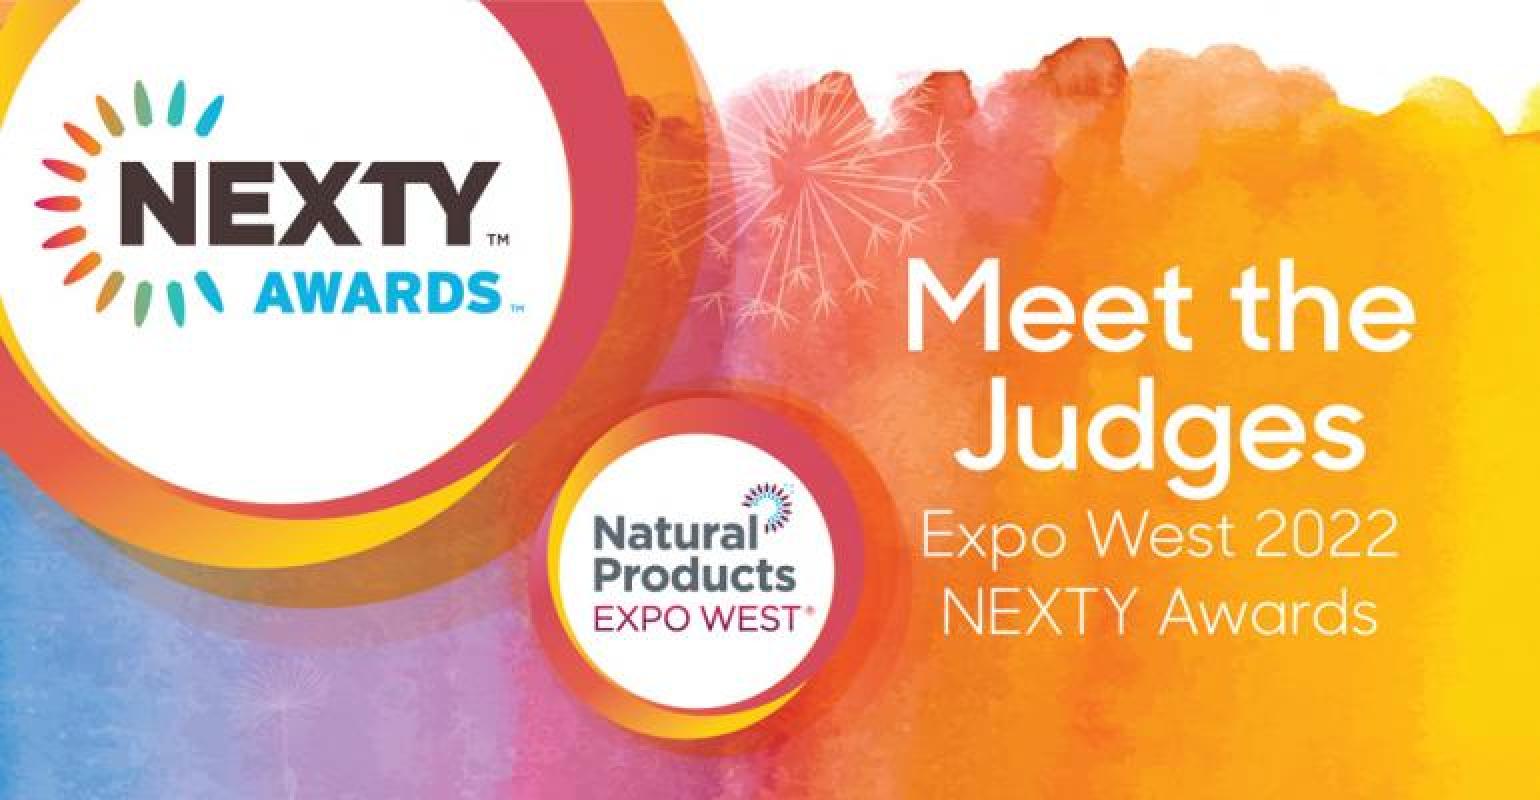 Meet the judges who help choose the Expo West 2022 NEXTY Award winners